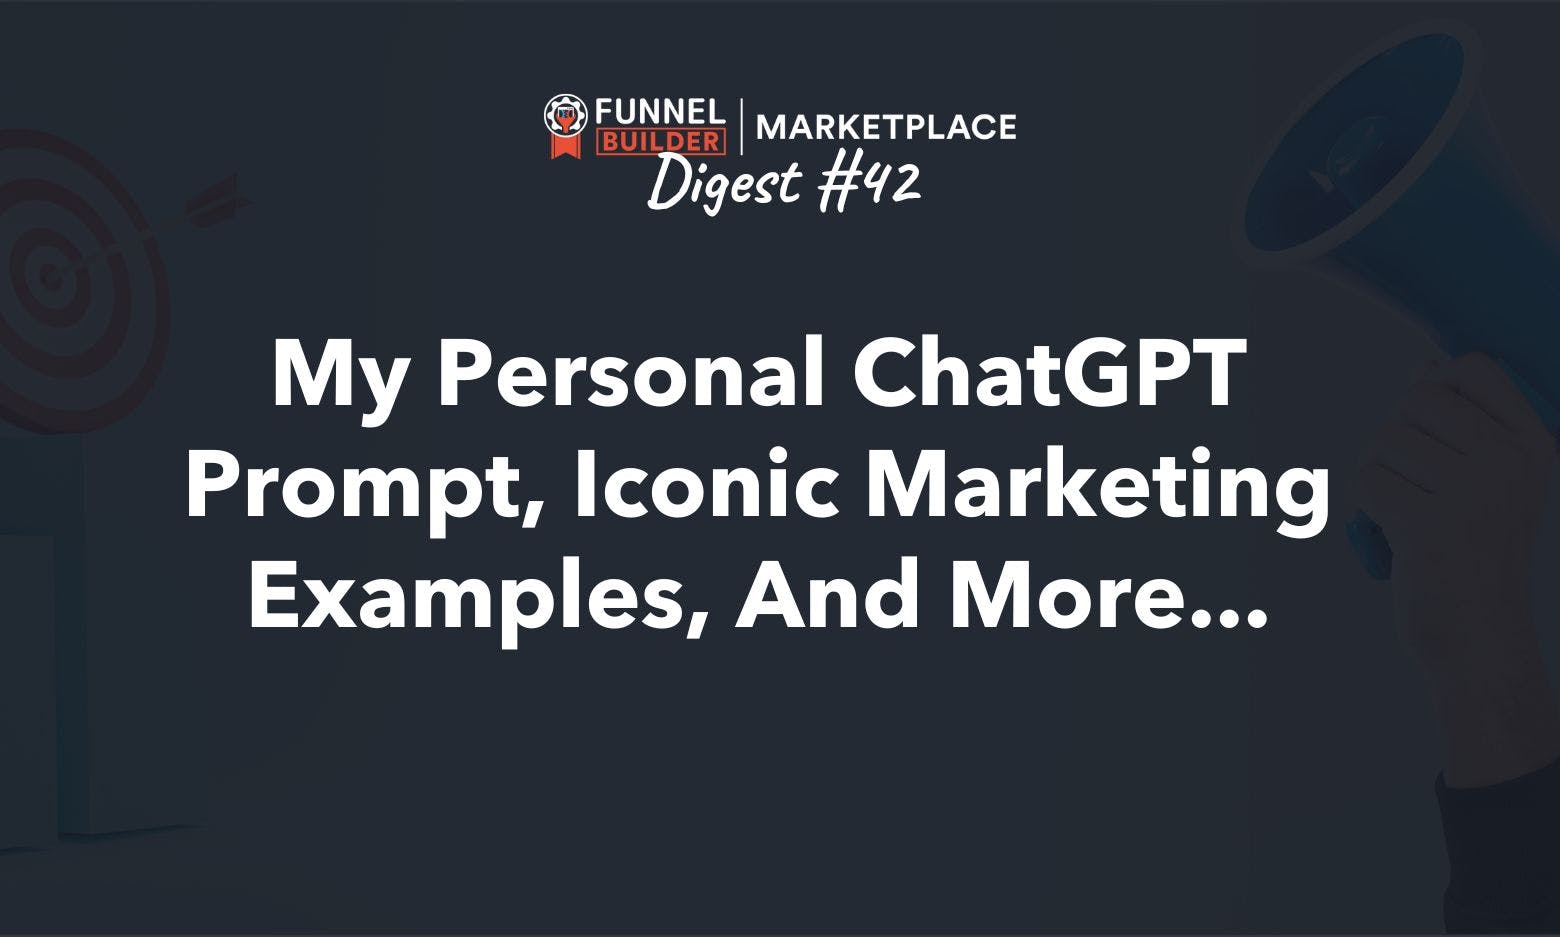 FBM Digest #42: My personal ChatGPT prompt, iconic marketing examples, and more...